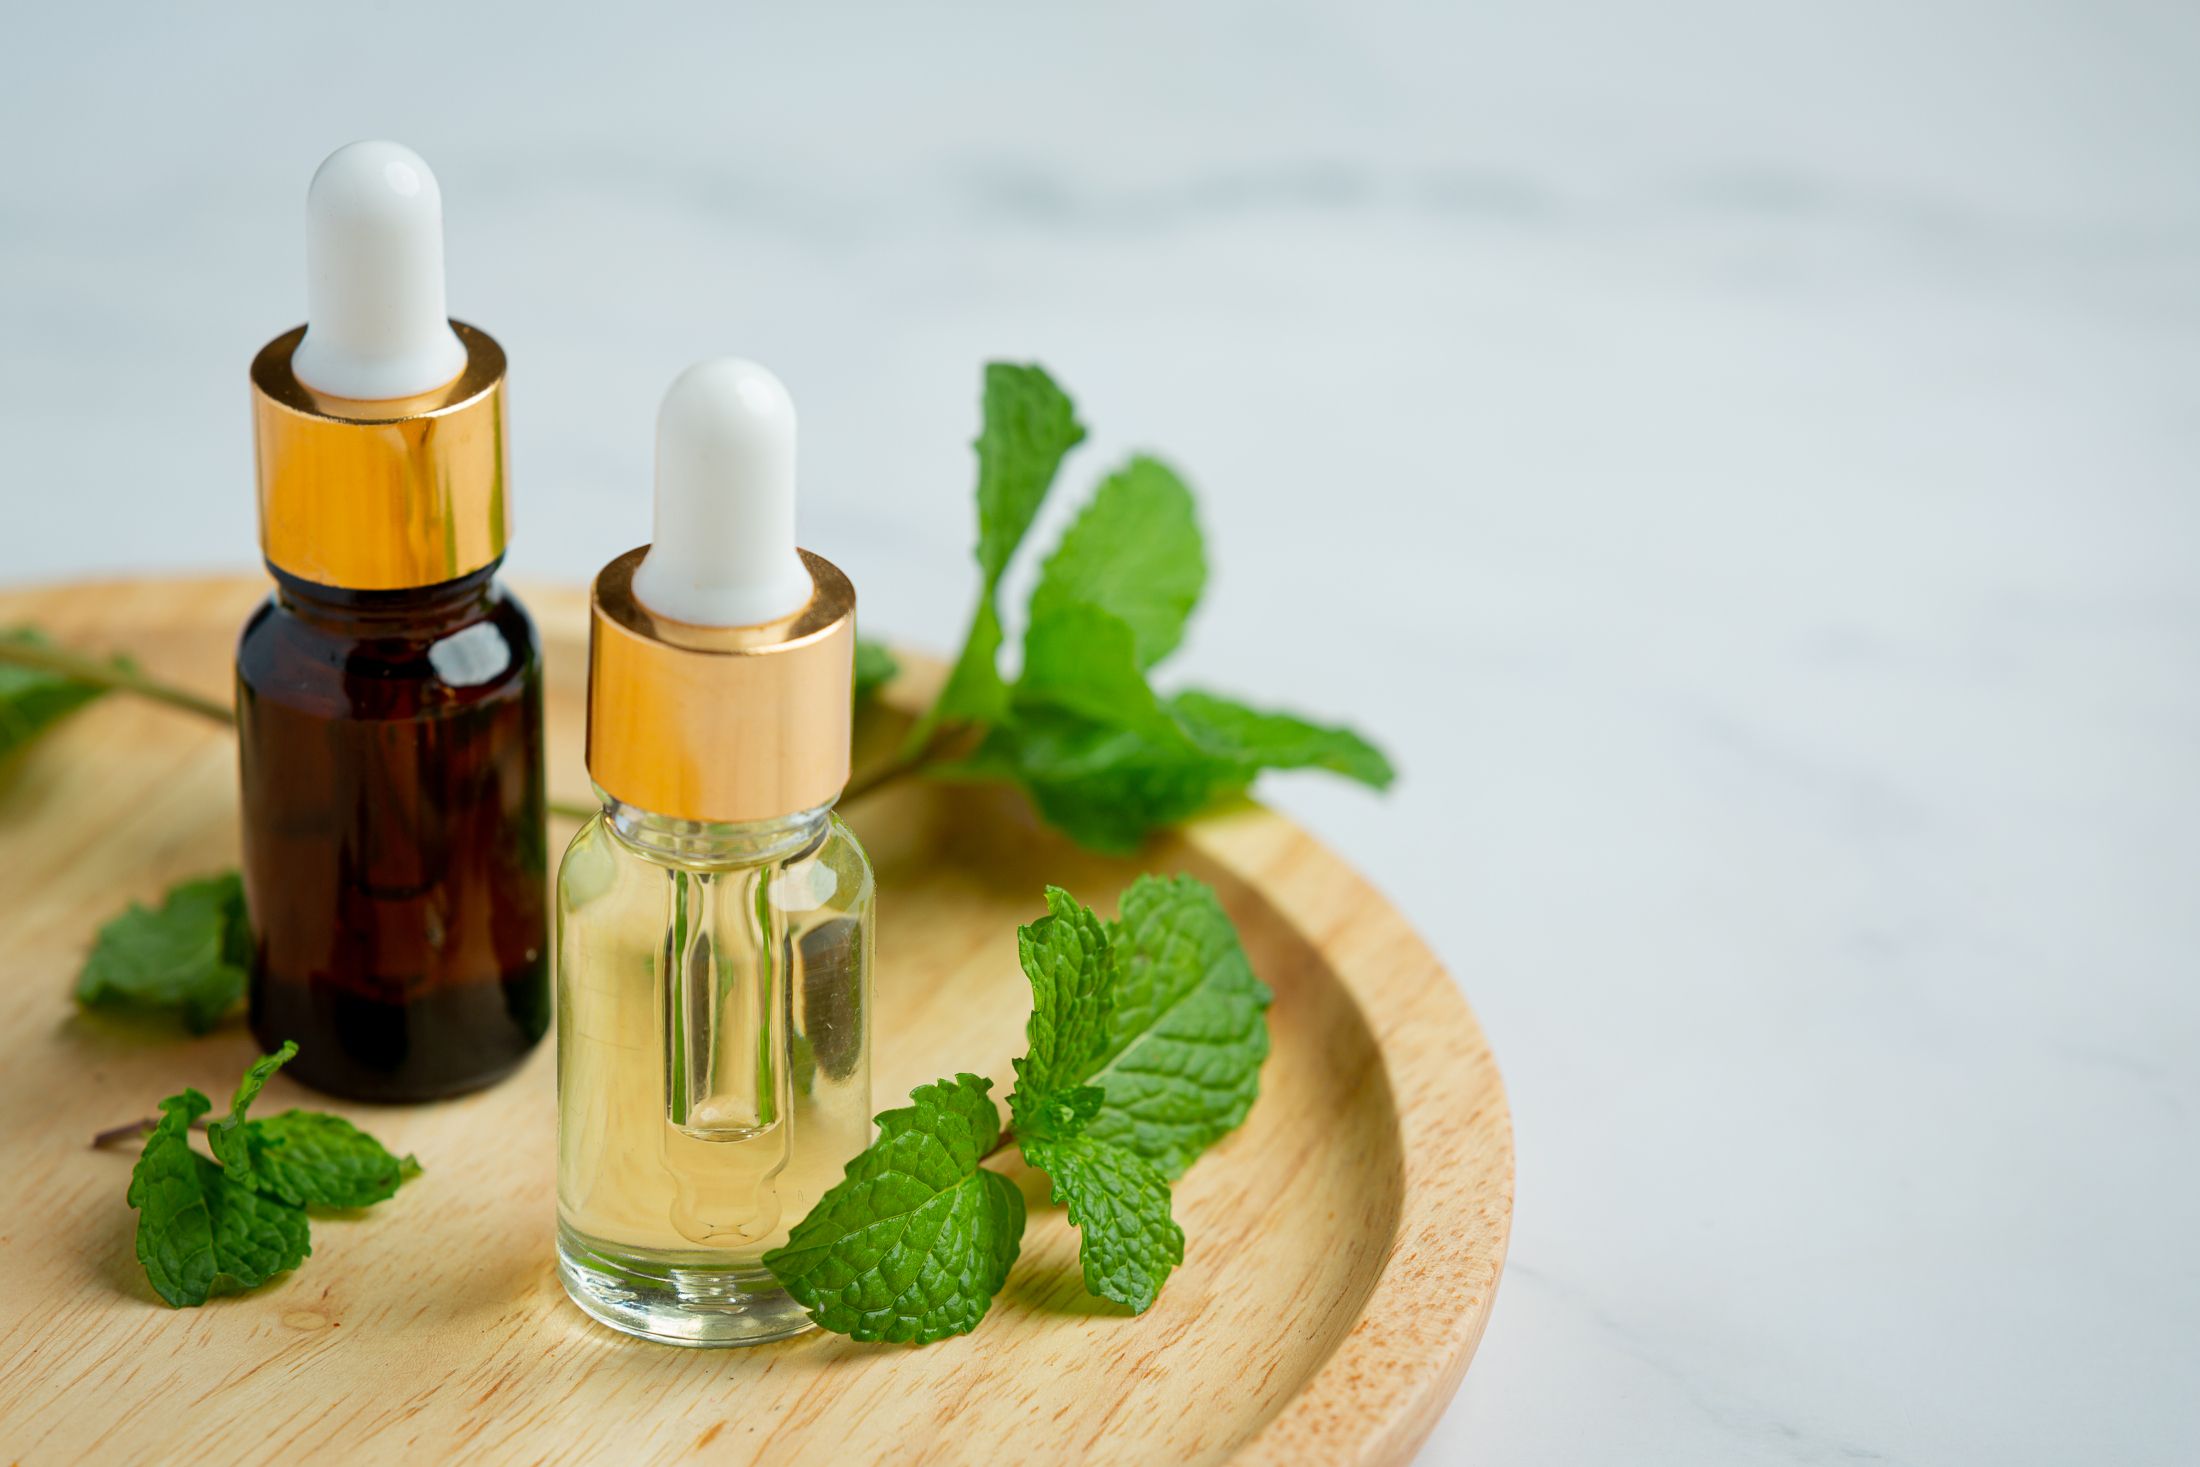 essential-oil-of-peppermint-in-bottle-with-fresh-green-peppermint.jpg